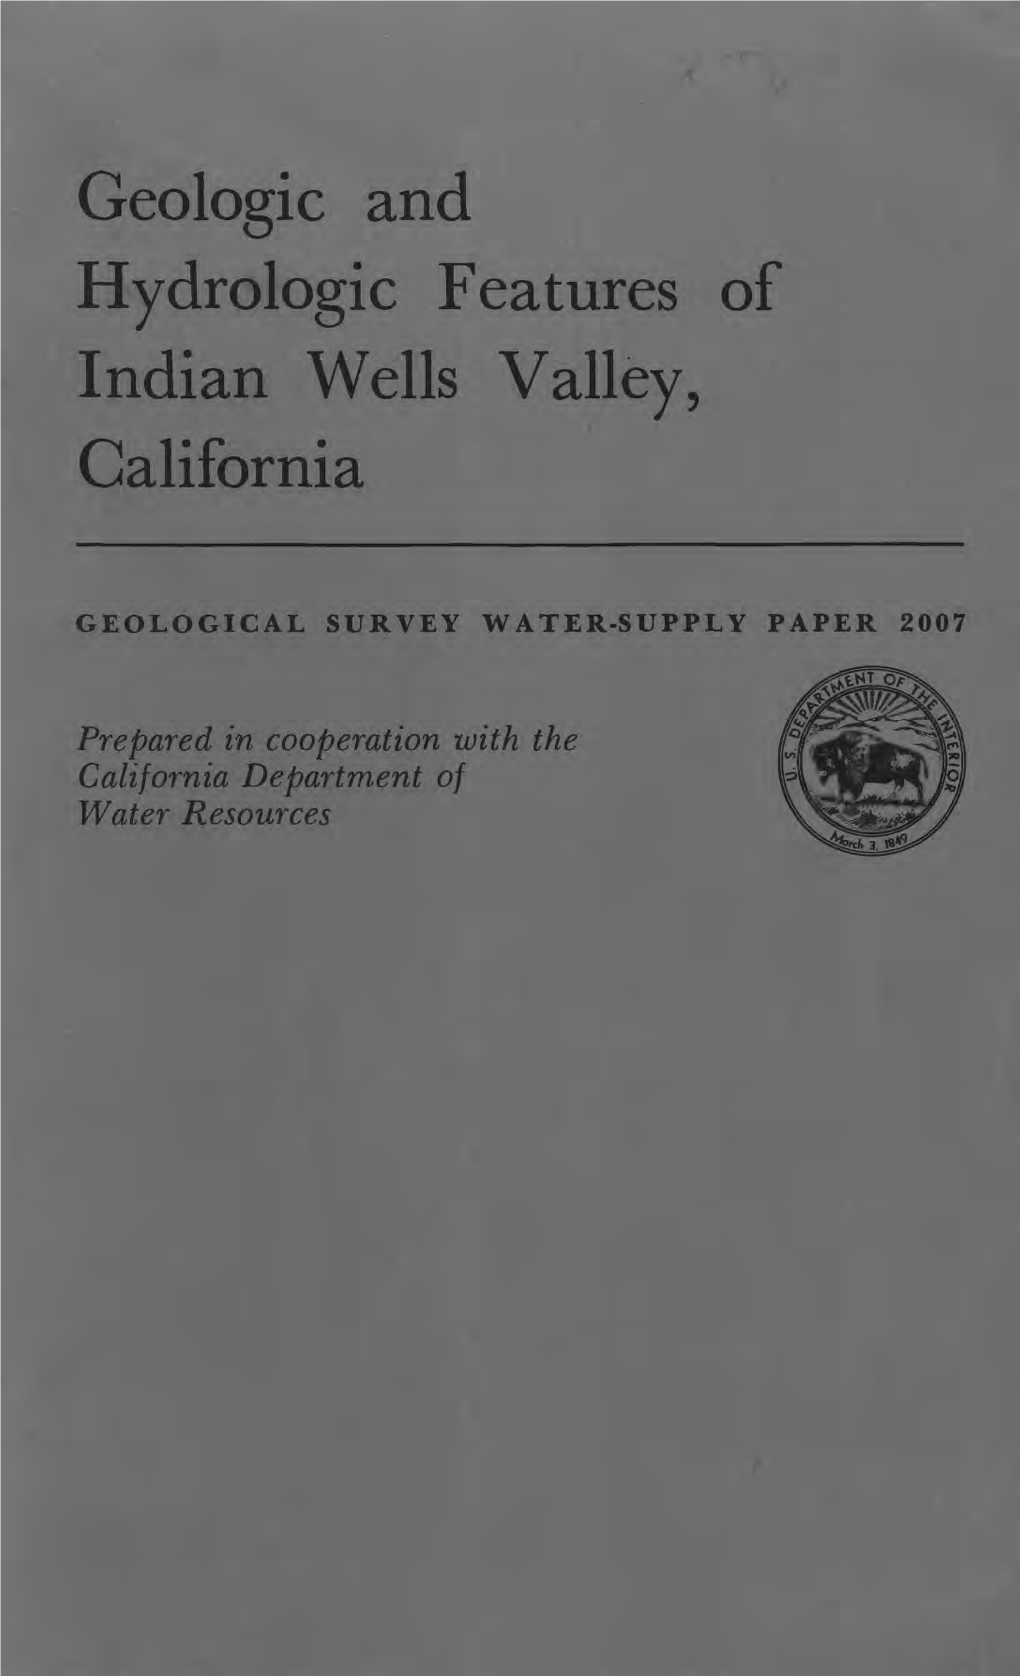 Geologic and Hydrologic Features of Indian Wells Valley, California